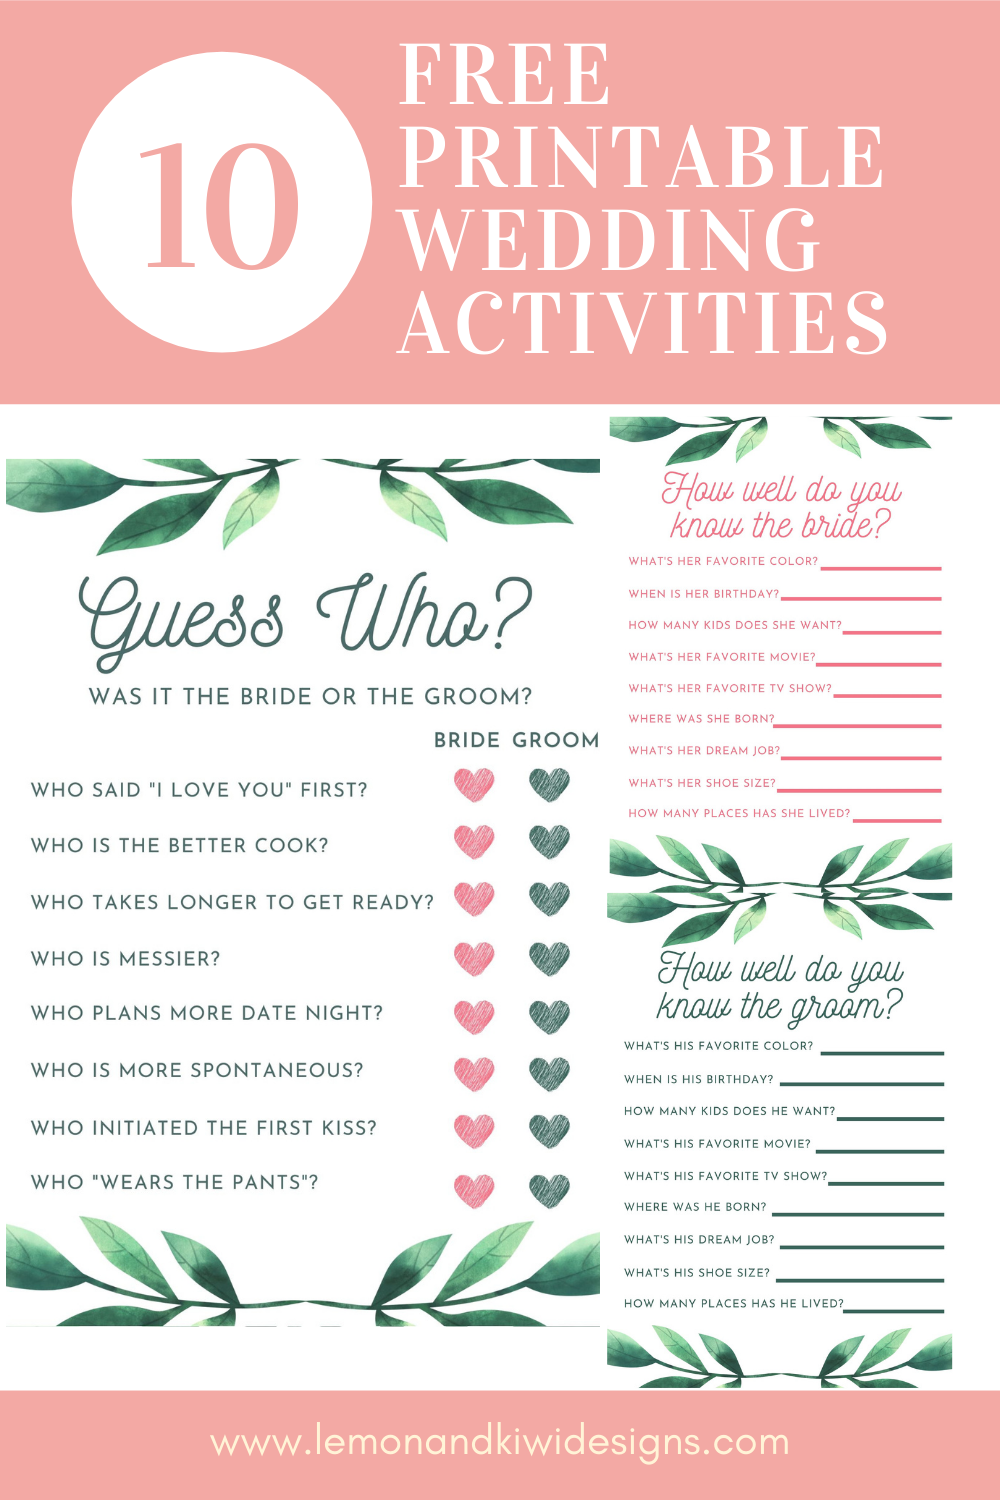 10 Free Printable Wedding Activities for Guests